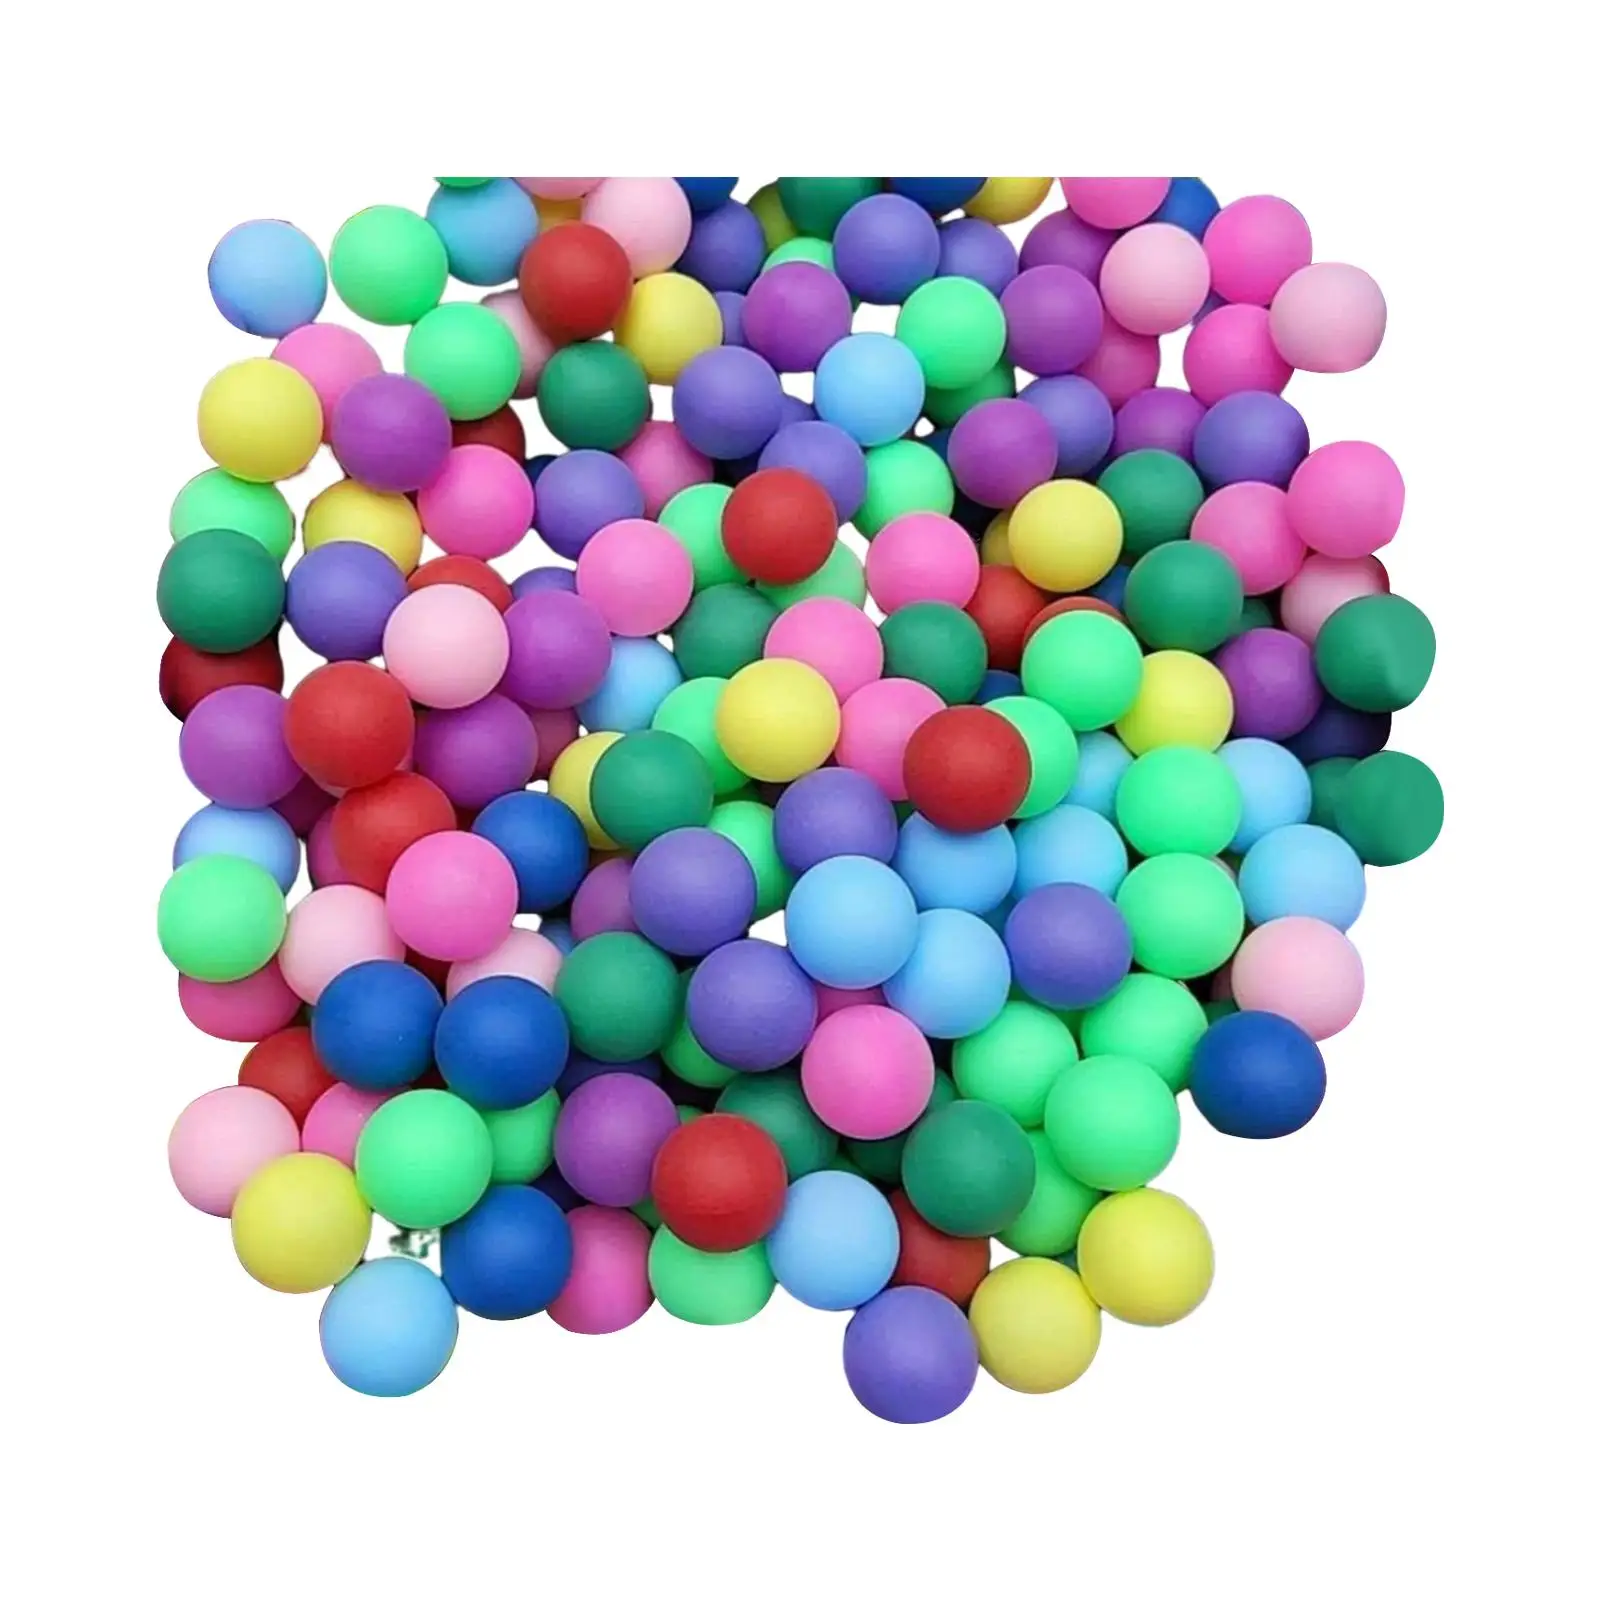 150x Ping Pong Balls Entertainment Table Tennis Balls for Party Decoration Arts and Craft Sports Family Games Classroom Games